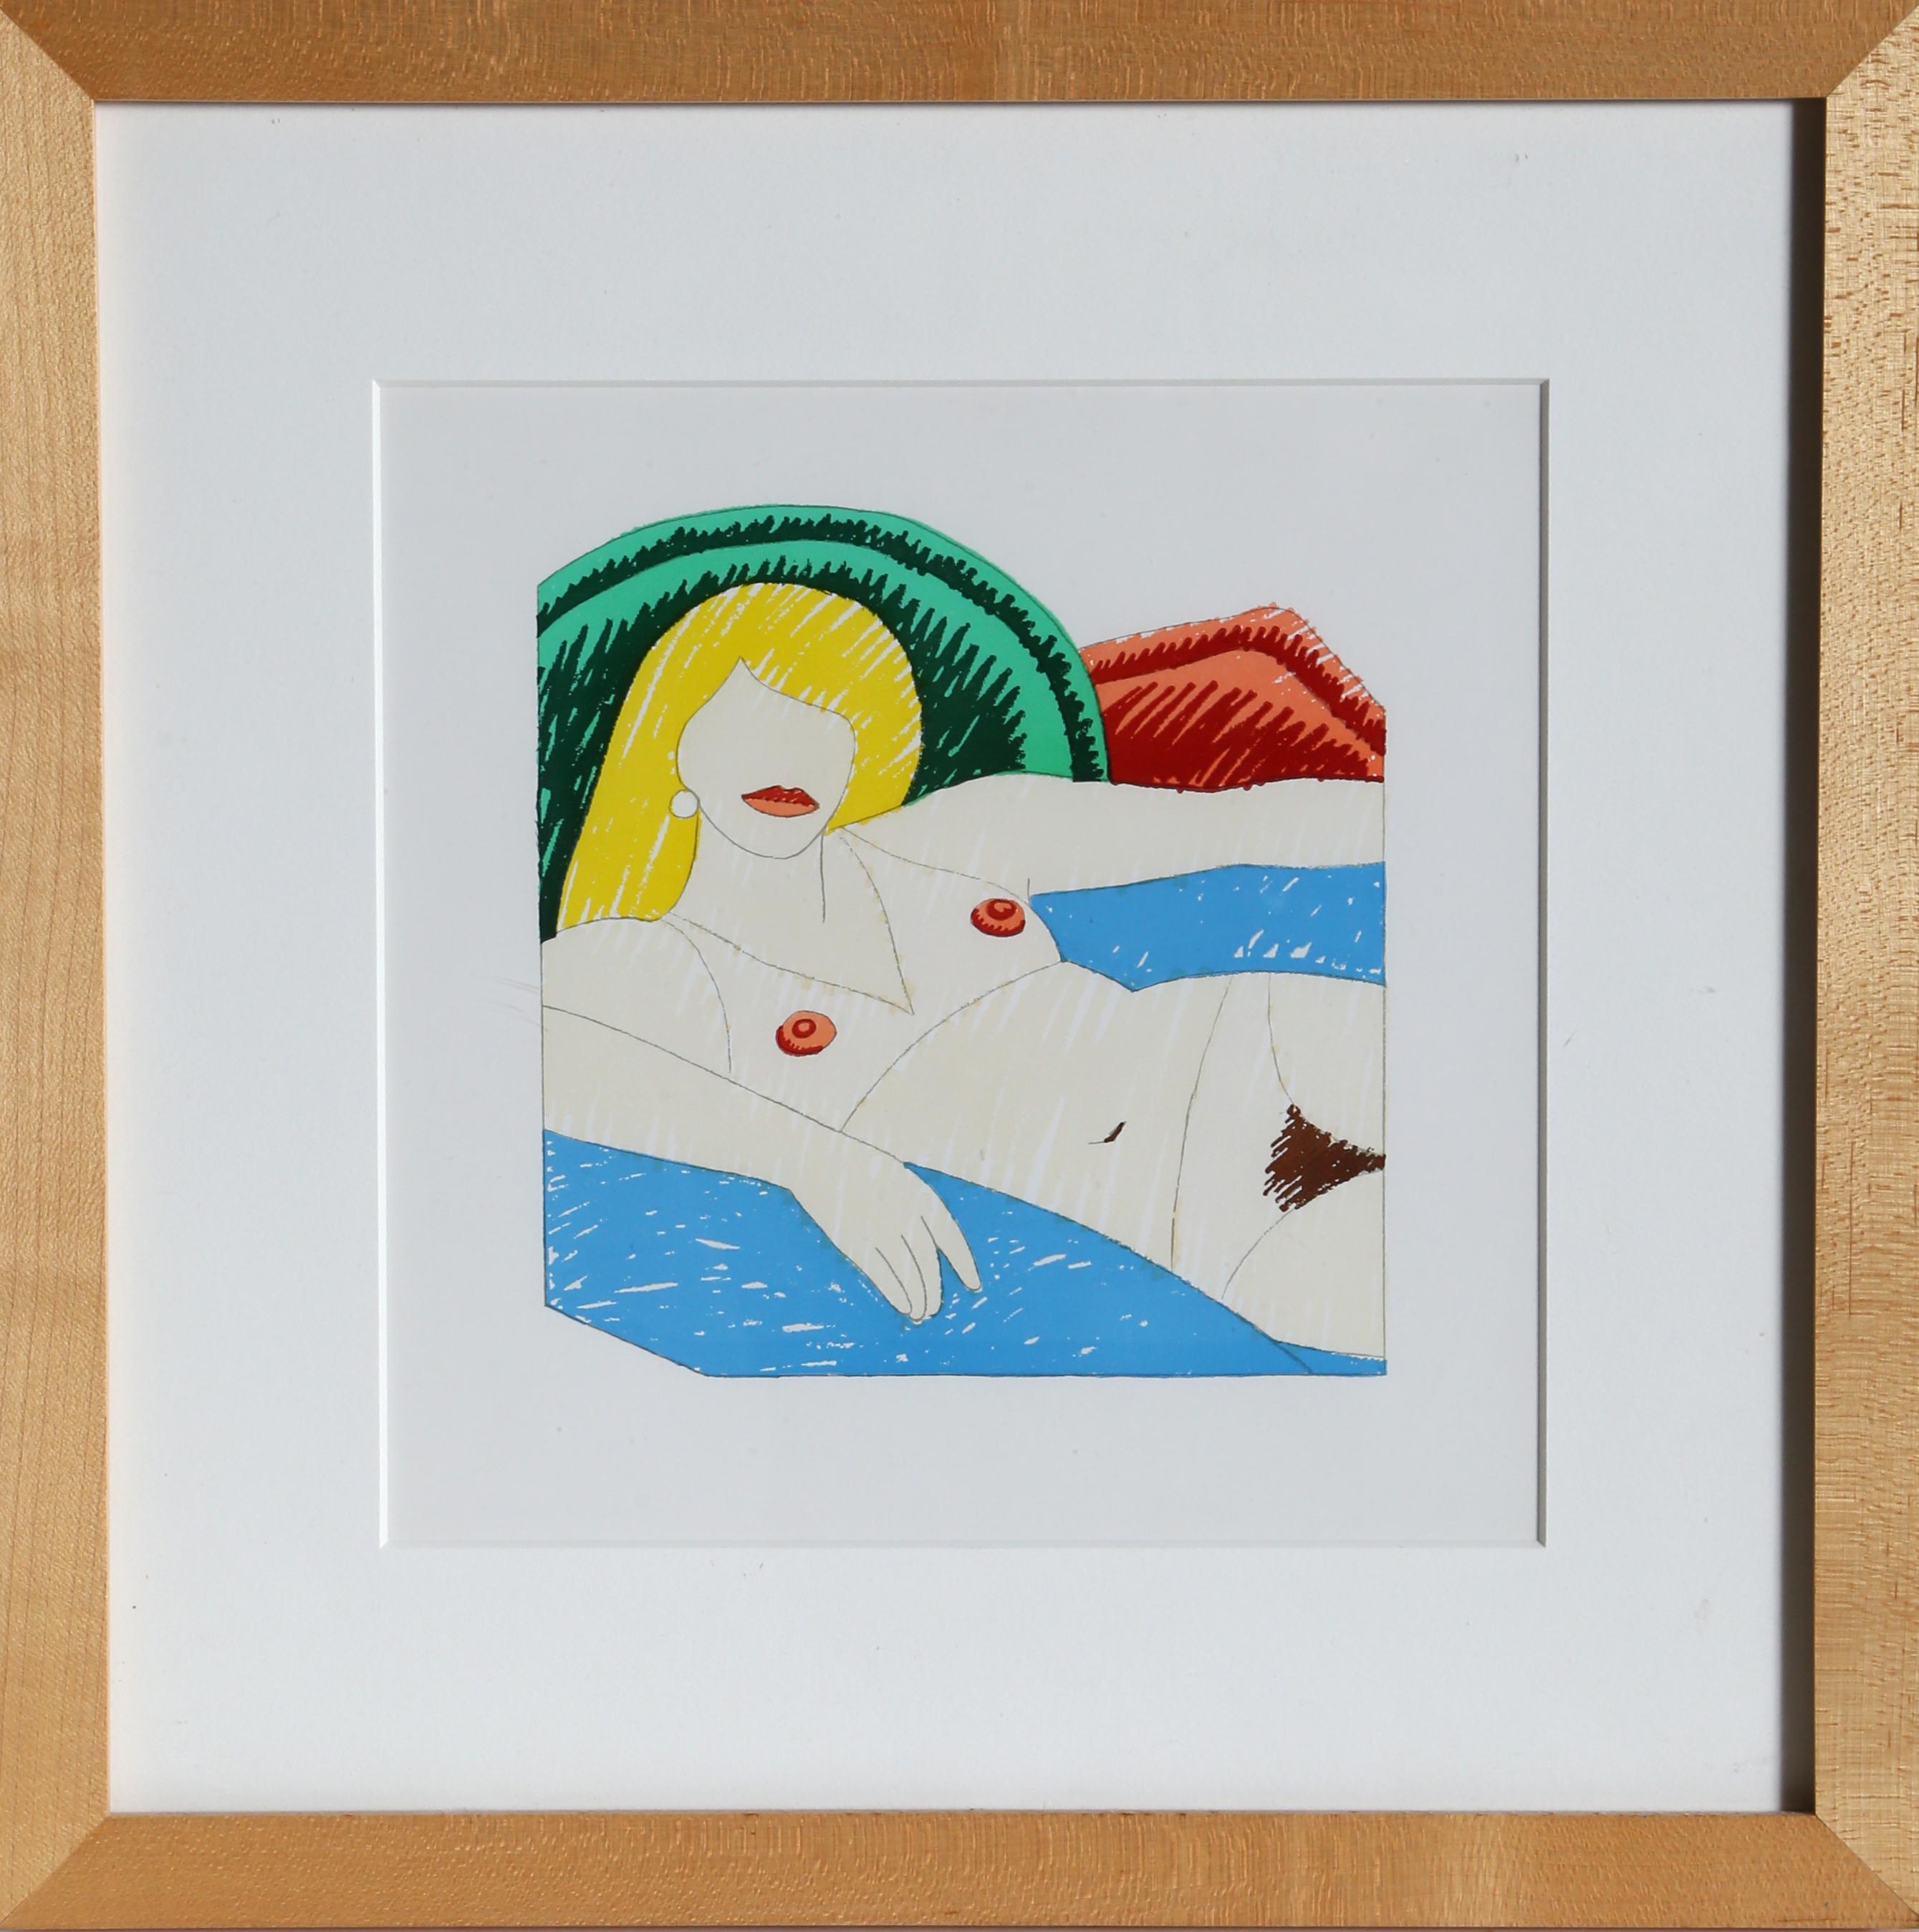 Shiny Nude by Tom Wesselmann, American (1931–2004)
Date: 1977
Lithograph, numbered verso
Edition of 1000
Image Size: 5.75 x 5.75 inches
Size: 8 x 8 in. (20.32 x 20.32 cm)
Frame Size: 13 x 13 inches
Printer: A. Colish Press
Publisher: Parasol Press,